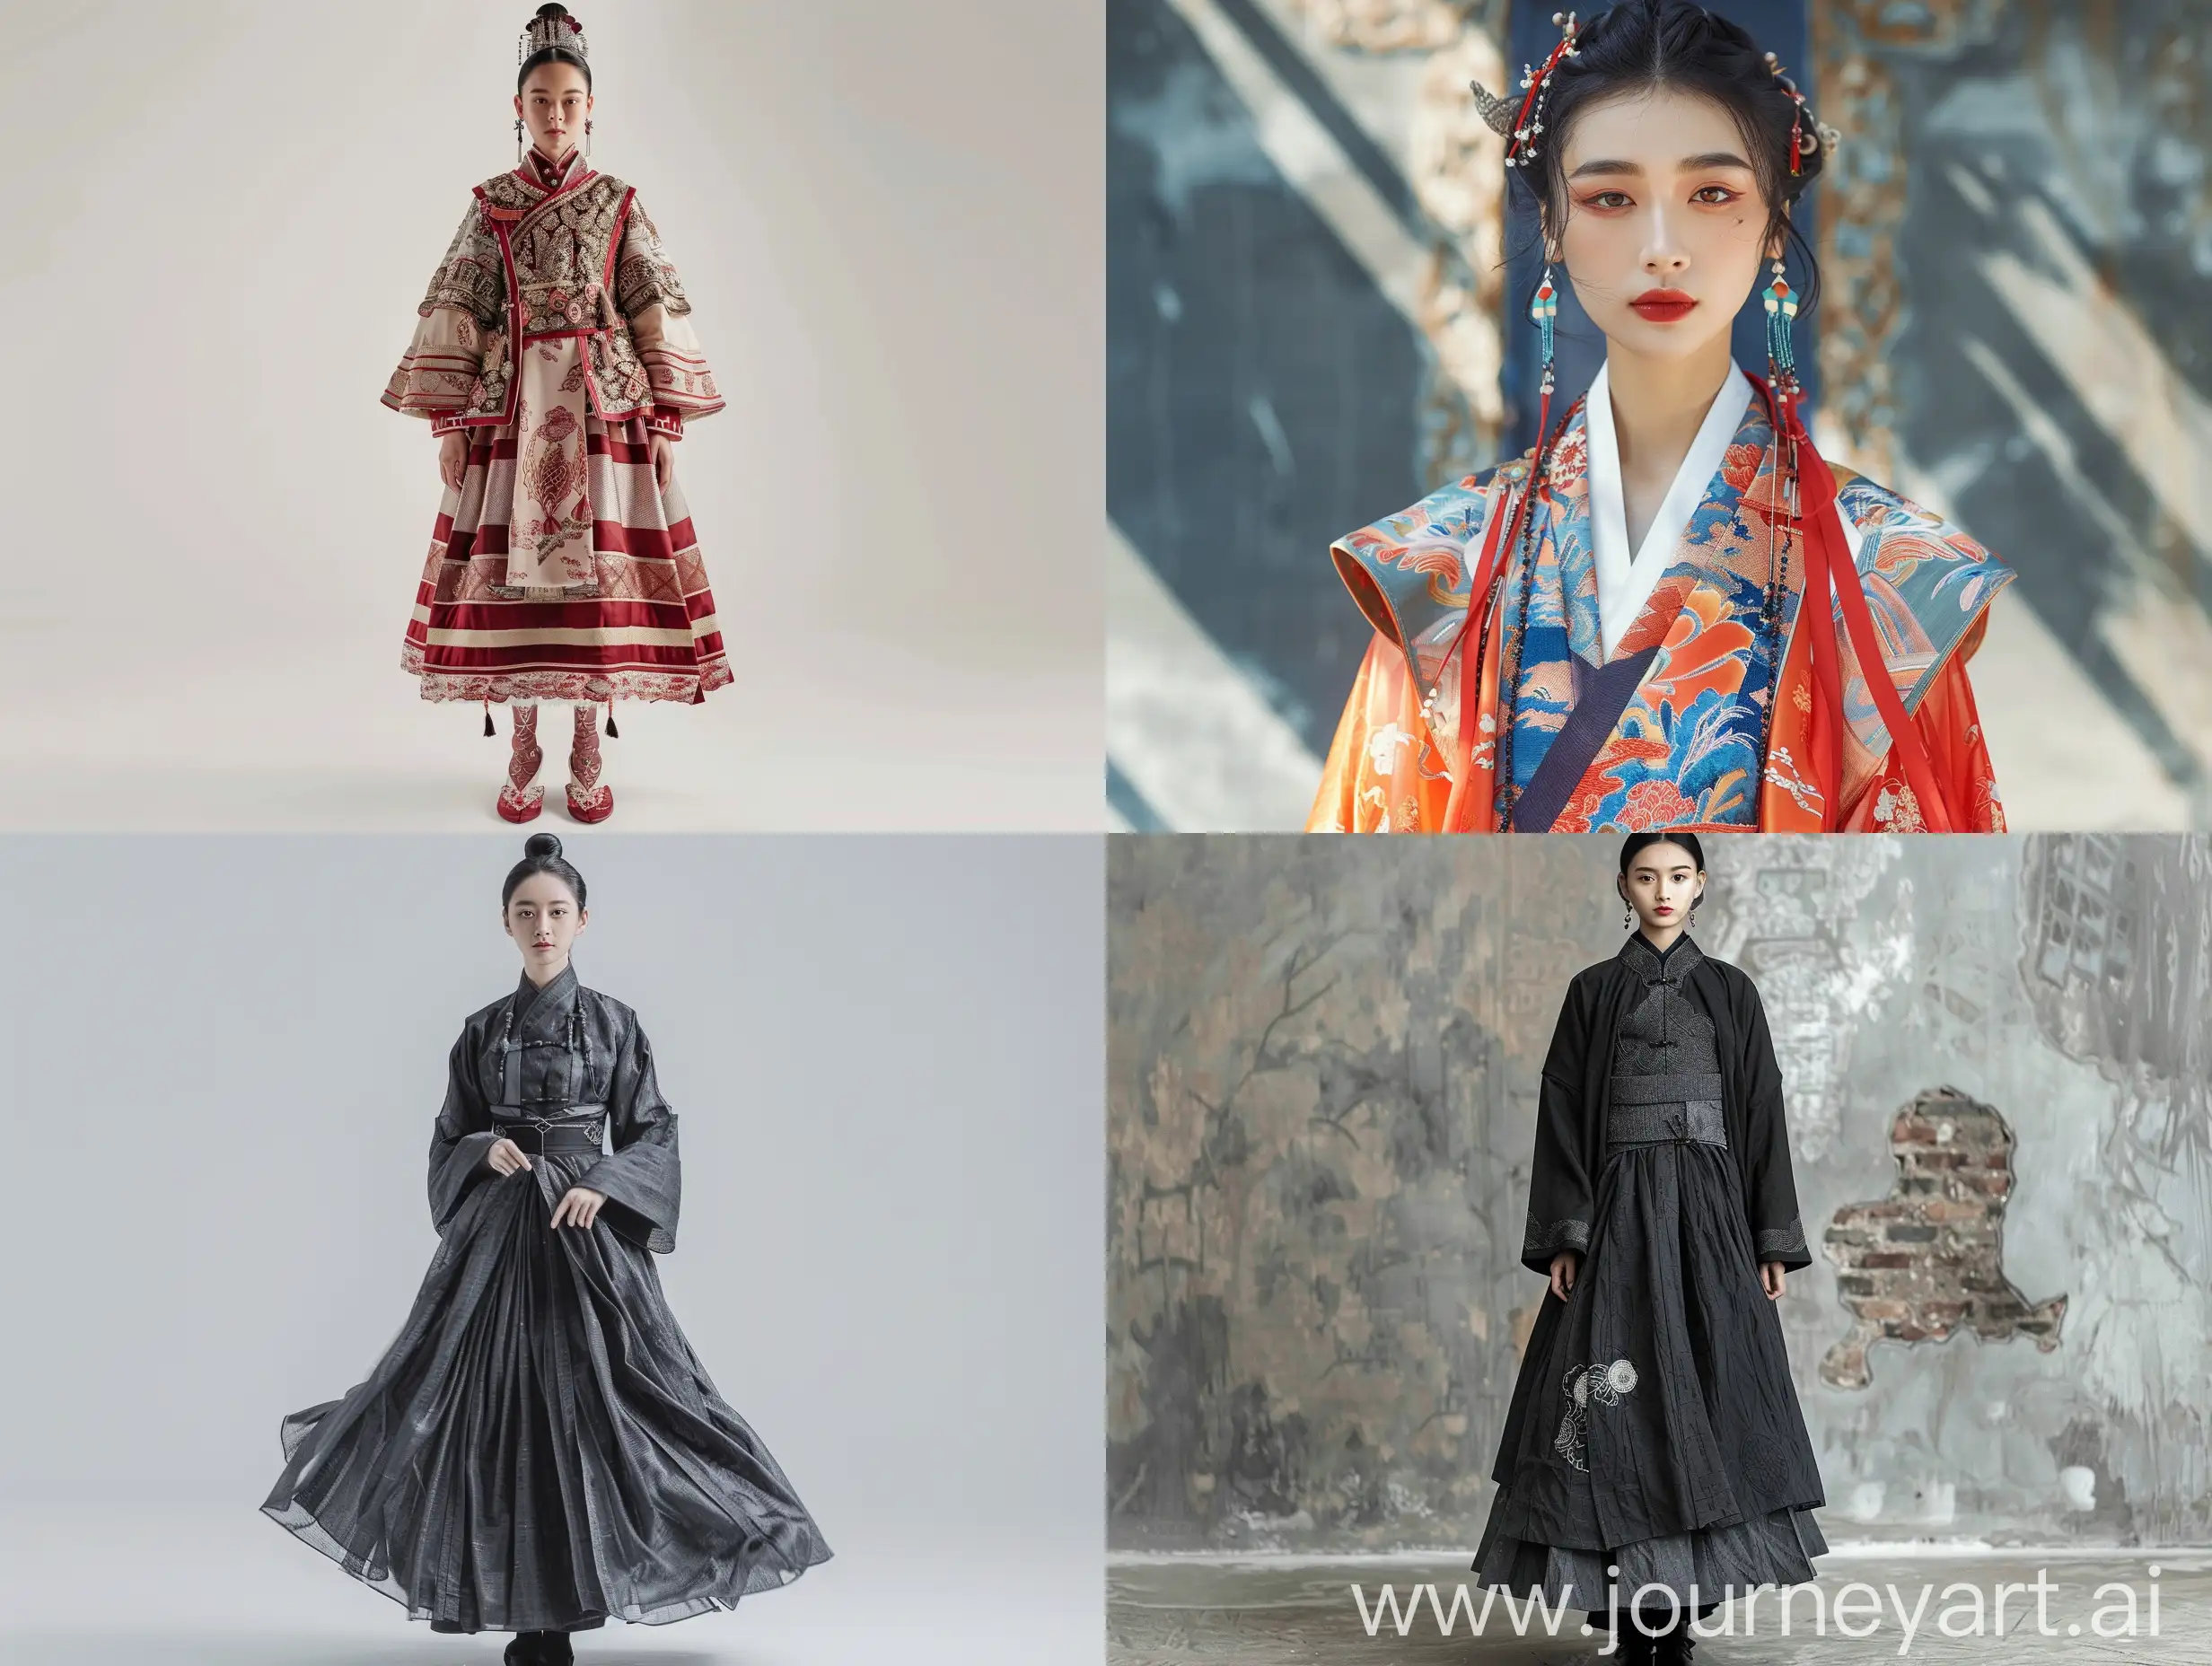 Modern-Manchu-Ceremonial-Dress-Fusion-Traditional-Garb-with-Contemporary-Twist